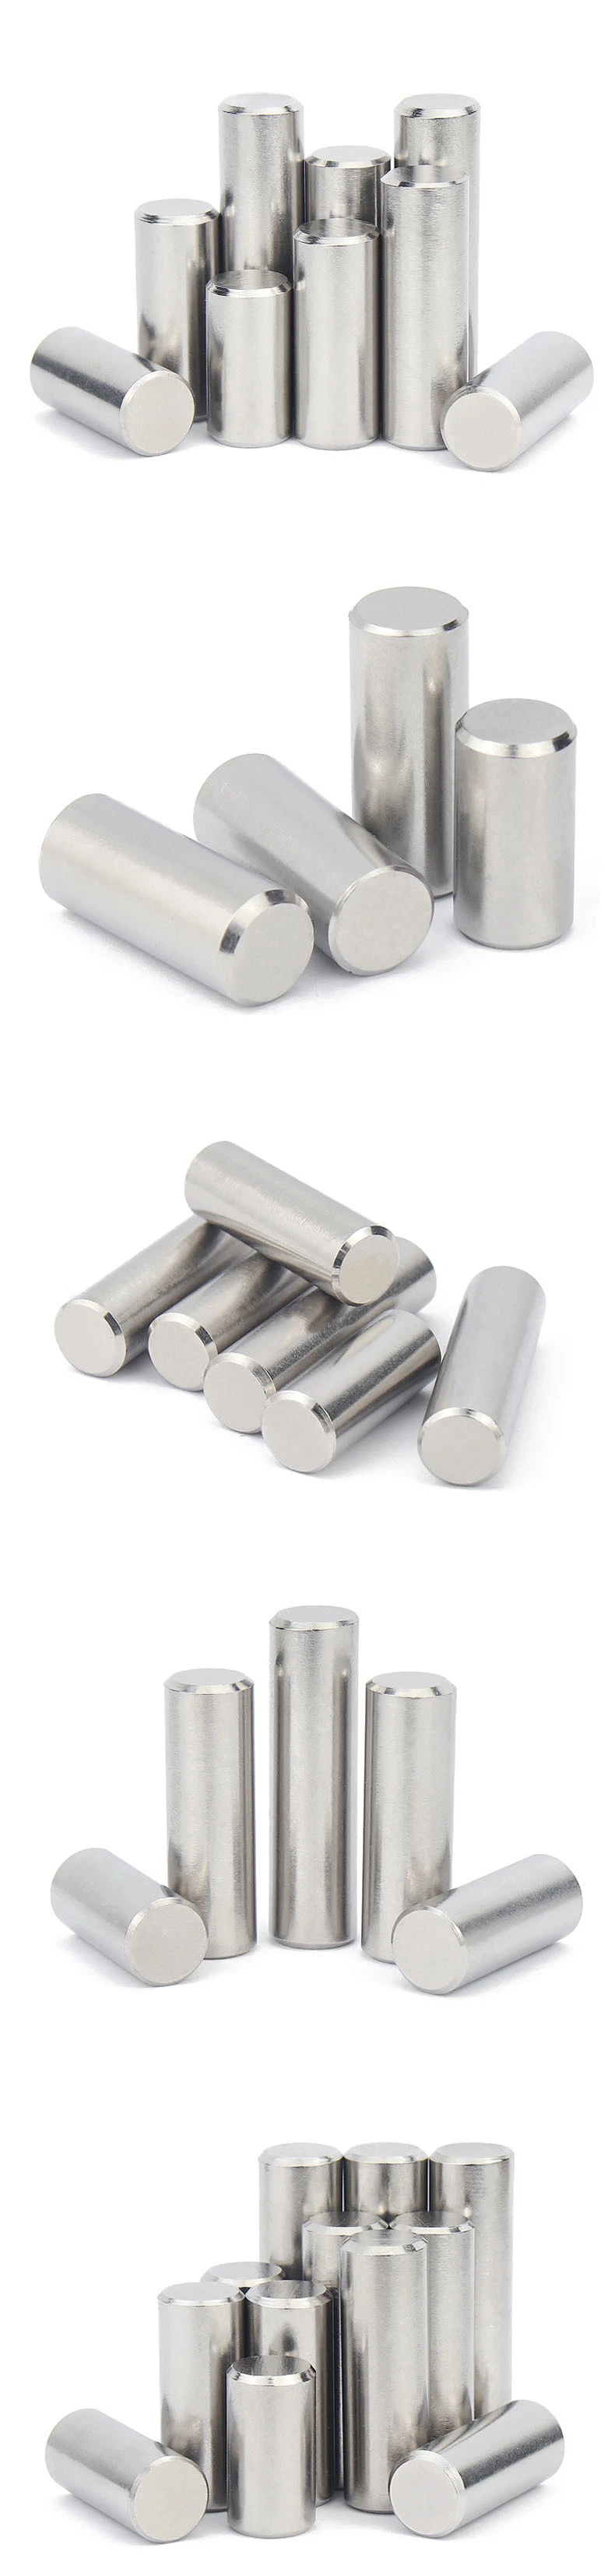 China Supplier SUS304 316 Round Studs Steel Zinc Plated Spring for Connecting Brass Dowel Pin